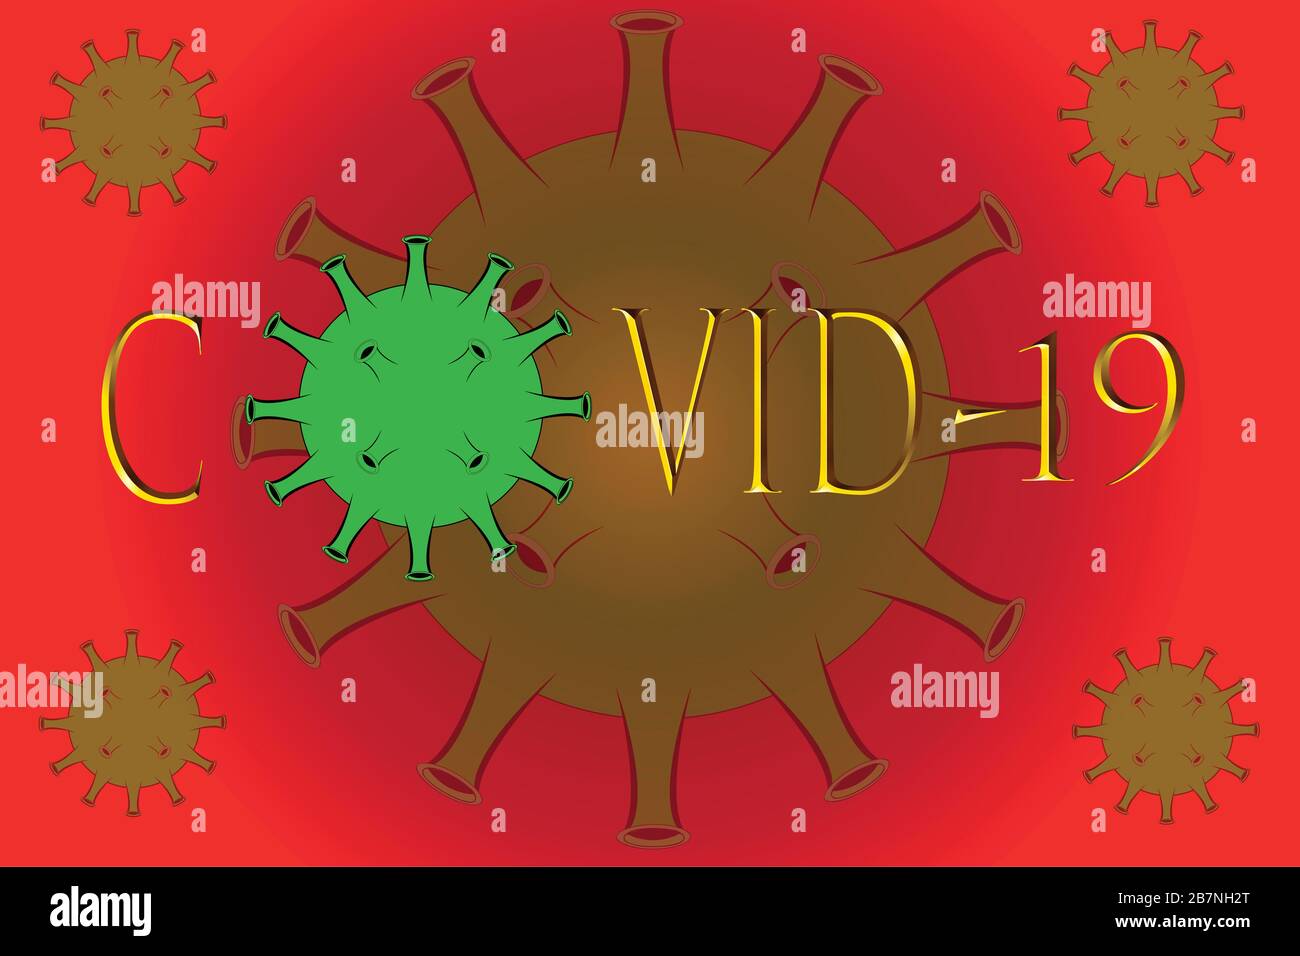 Illustration of a virus corona with a caption and layout Stock Photo